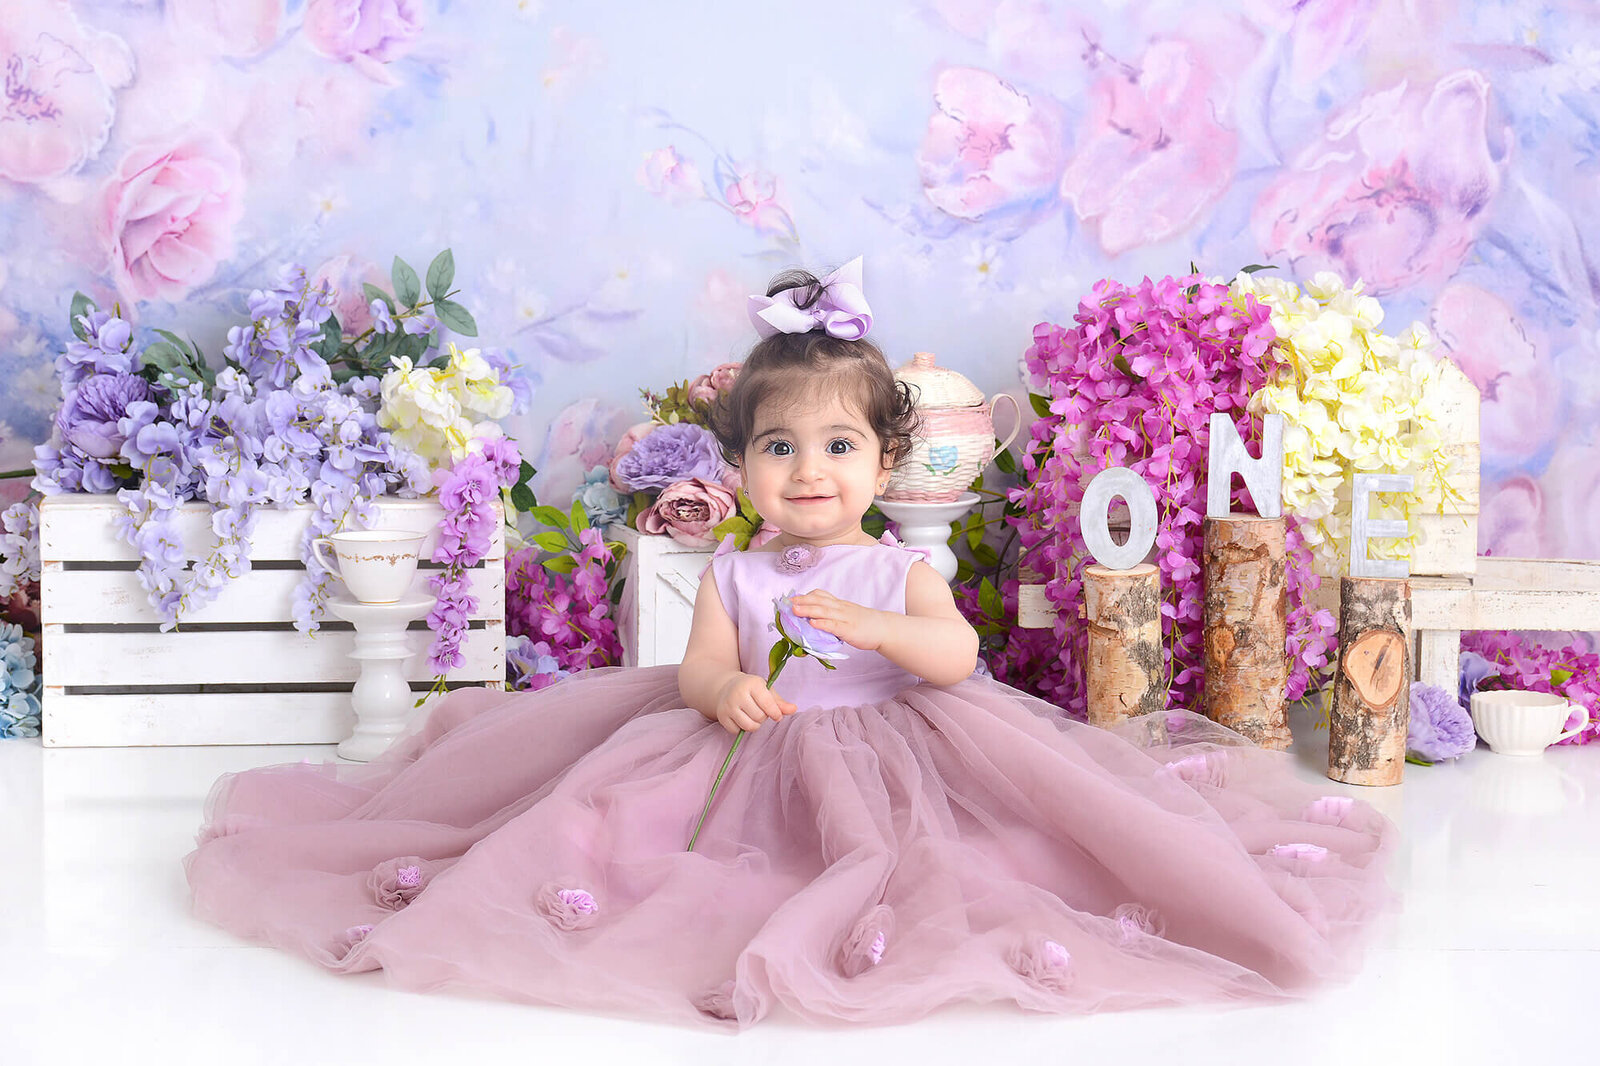 girl wears an elegant purple dollcake dress in front of a classy elegant first birthday shoot background